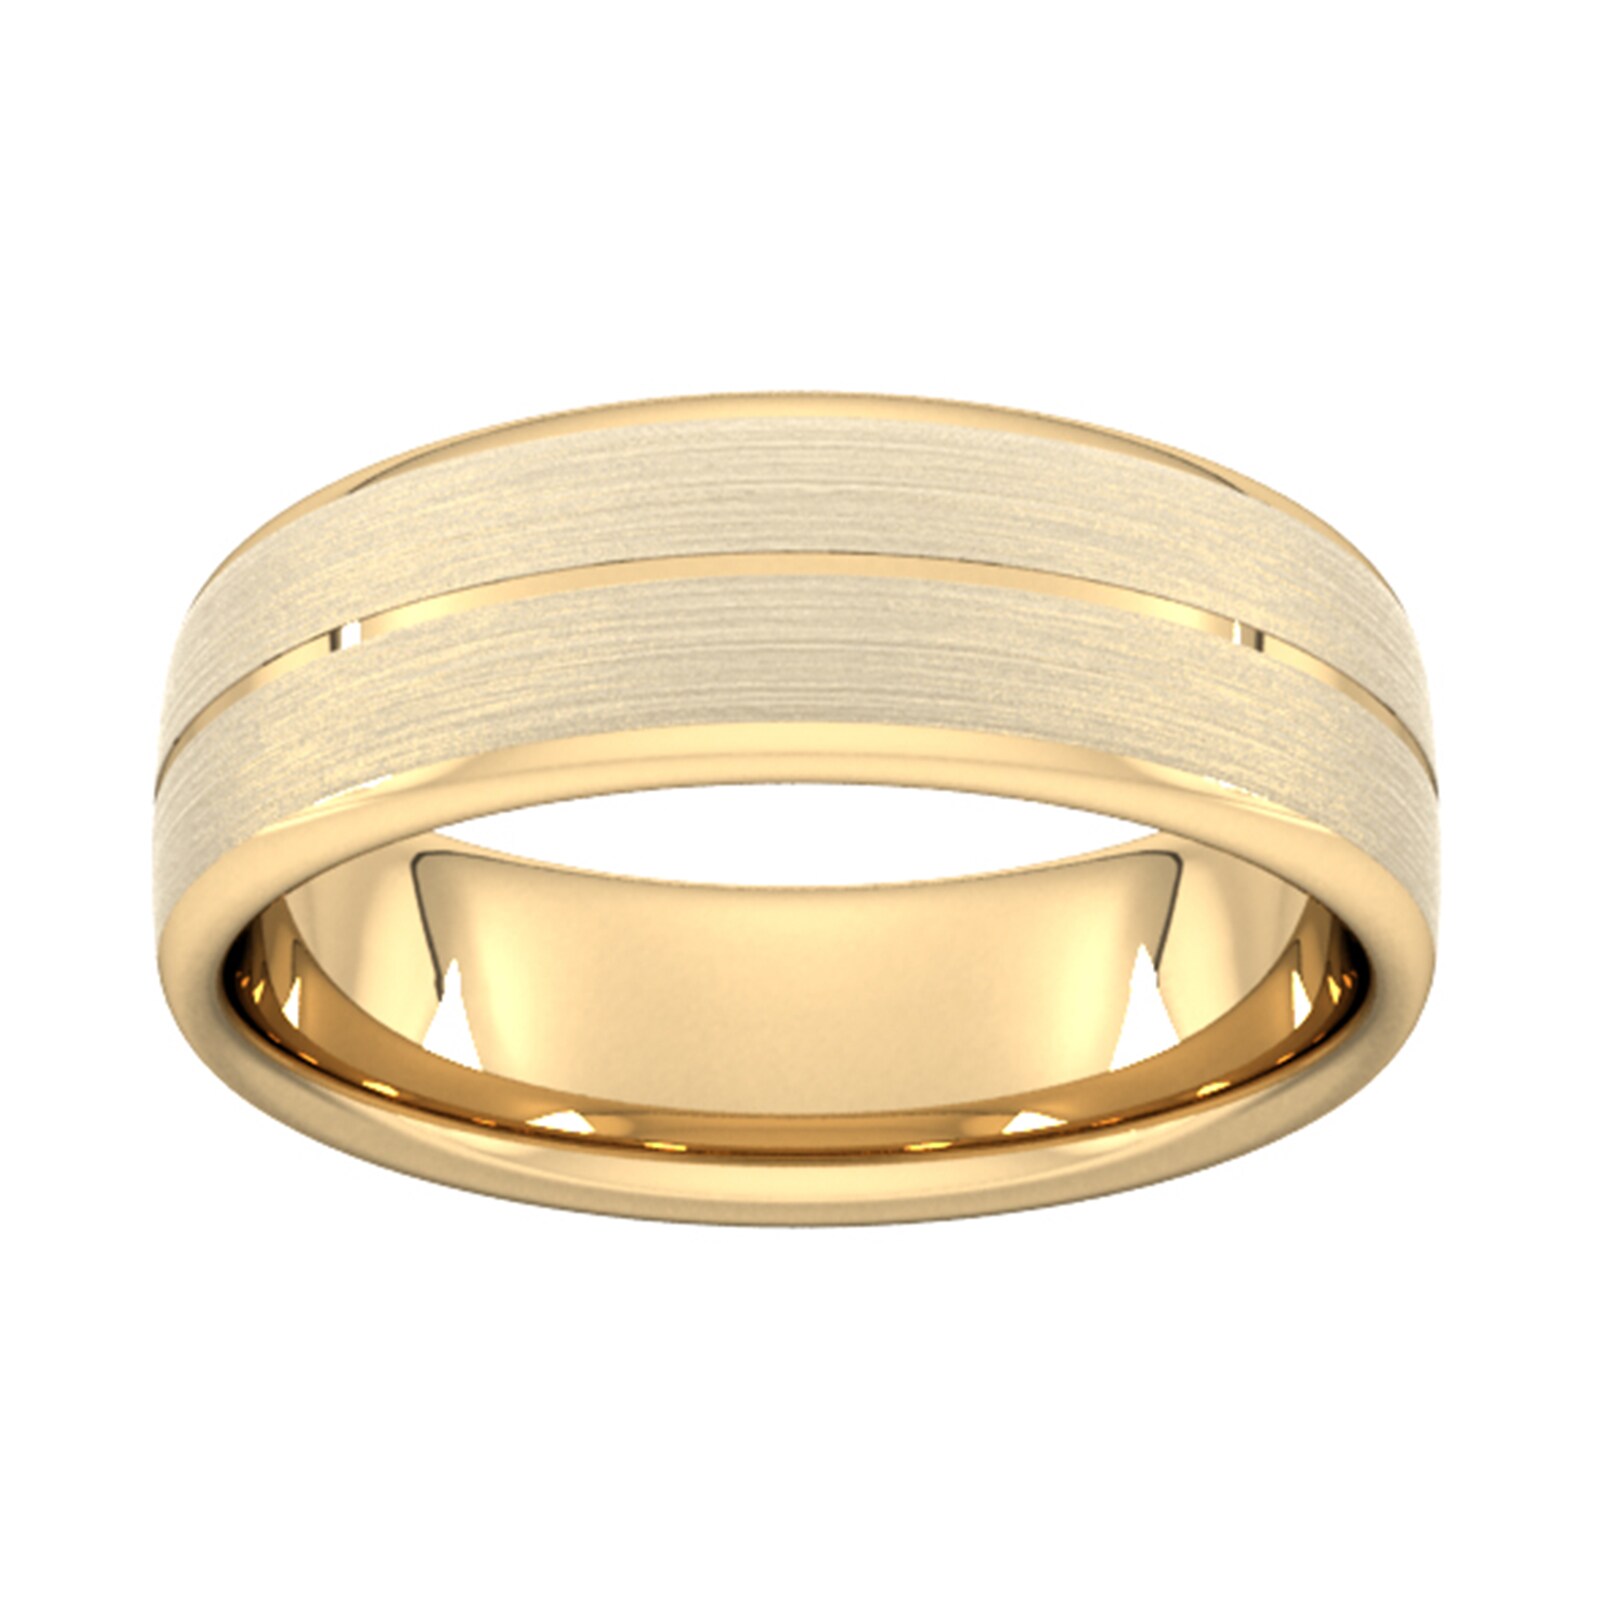 7mm Slight Court Extra Heavy Centre Groove With Chamfered Edge Wedding Ring In 18 Carat Yellow Gold - Ring Size Z